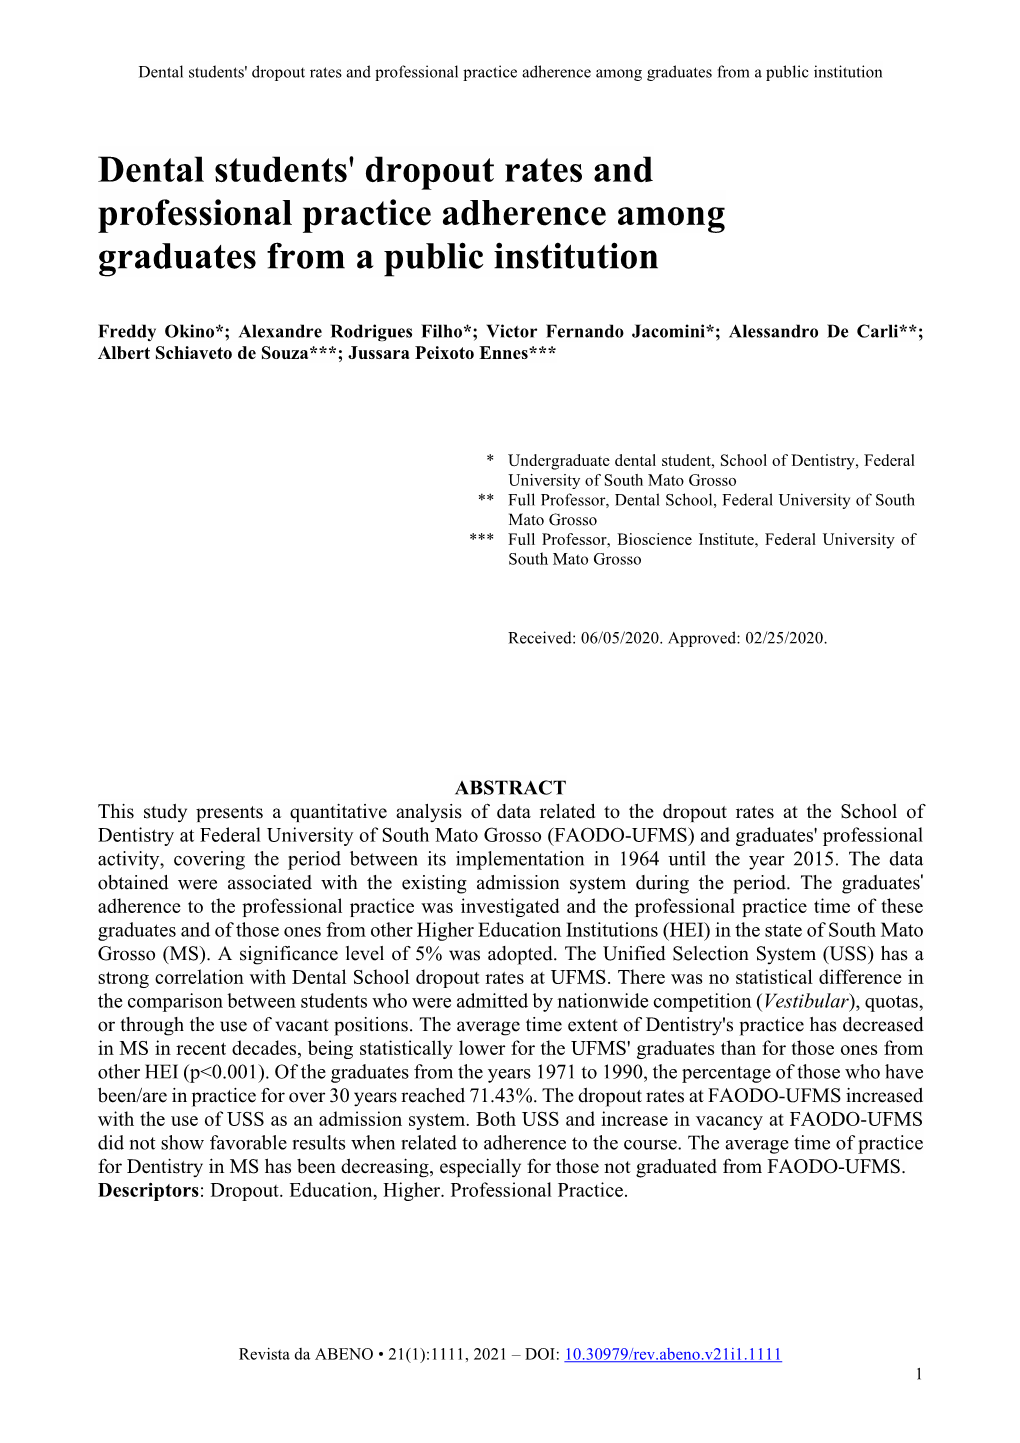 Dental Students' Dropout Rates and Professional Practice Adherence Among Graduates from a Public Institution